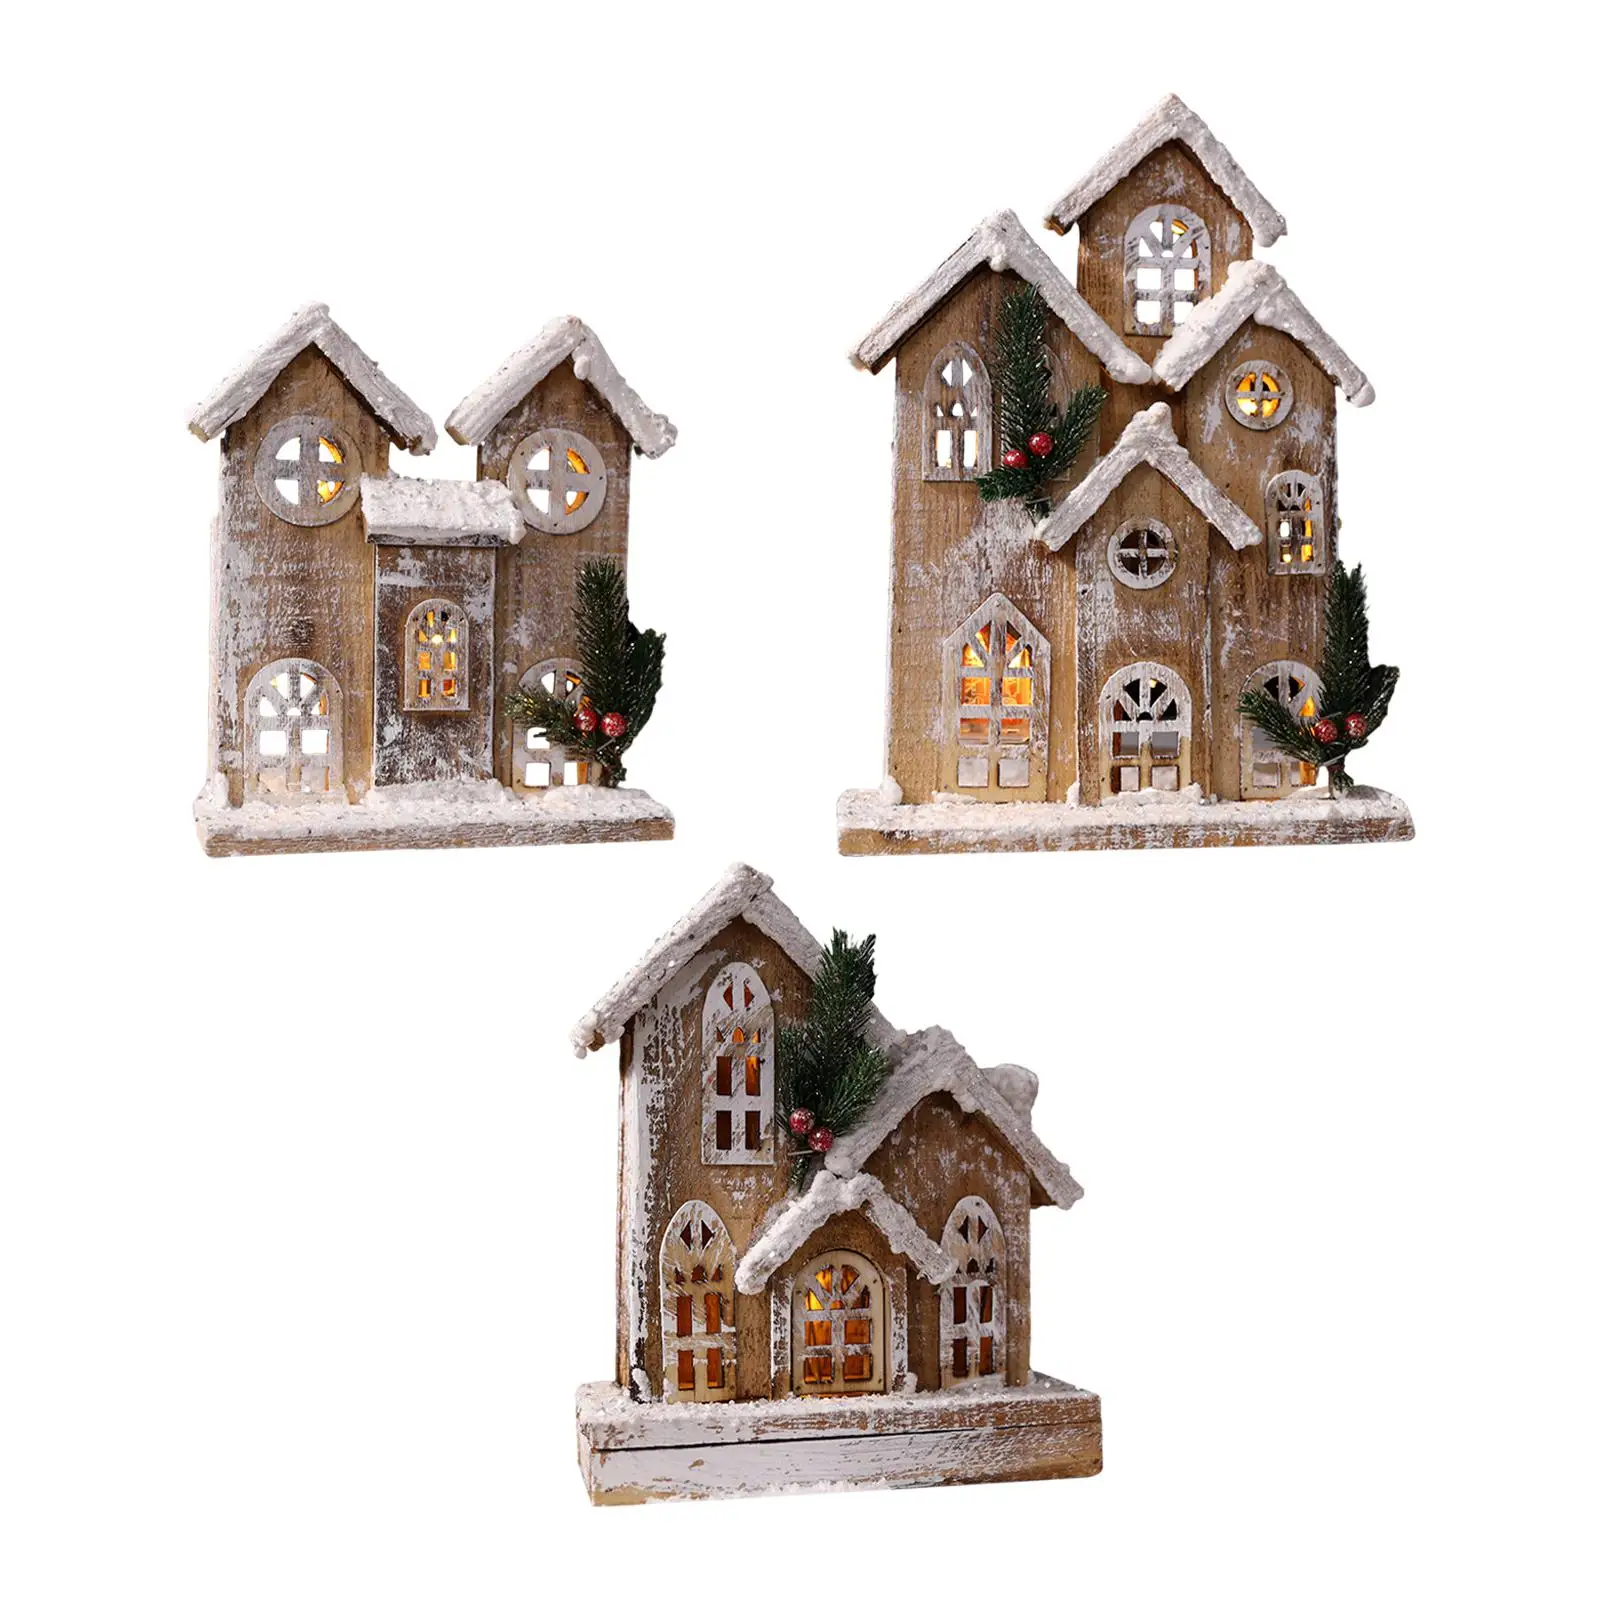 

Snow Village Houses Ornament Building Figurine Crafts Christmas Gift Christmas Ornament for Xmas Balcony Festival Bedroom Party